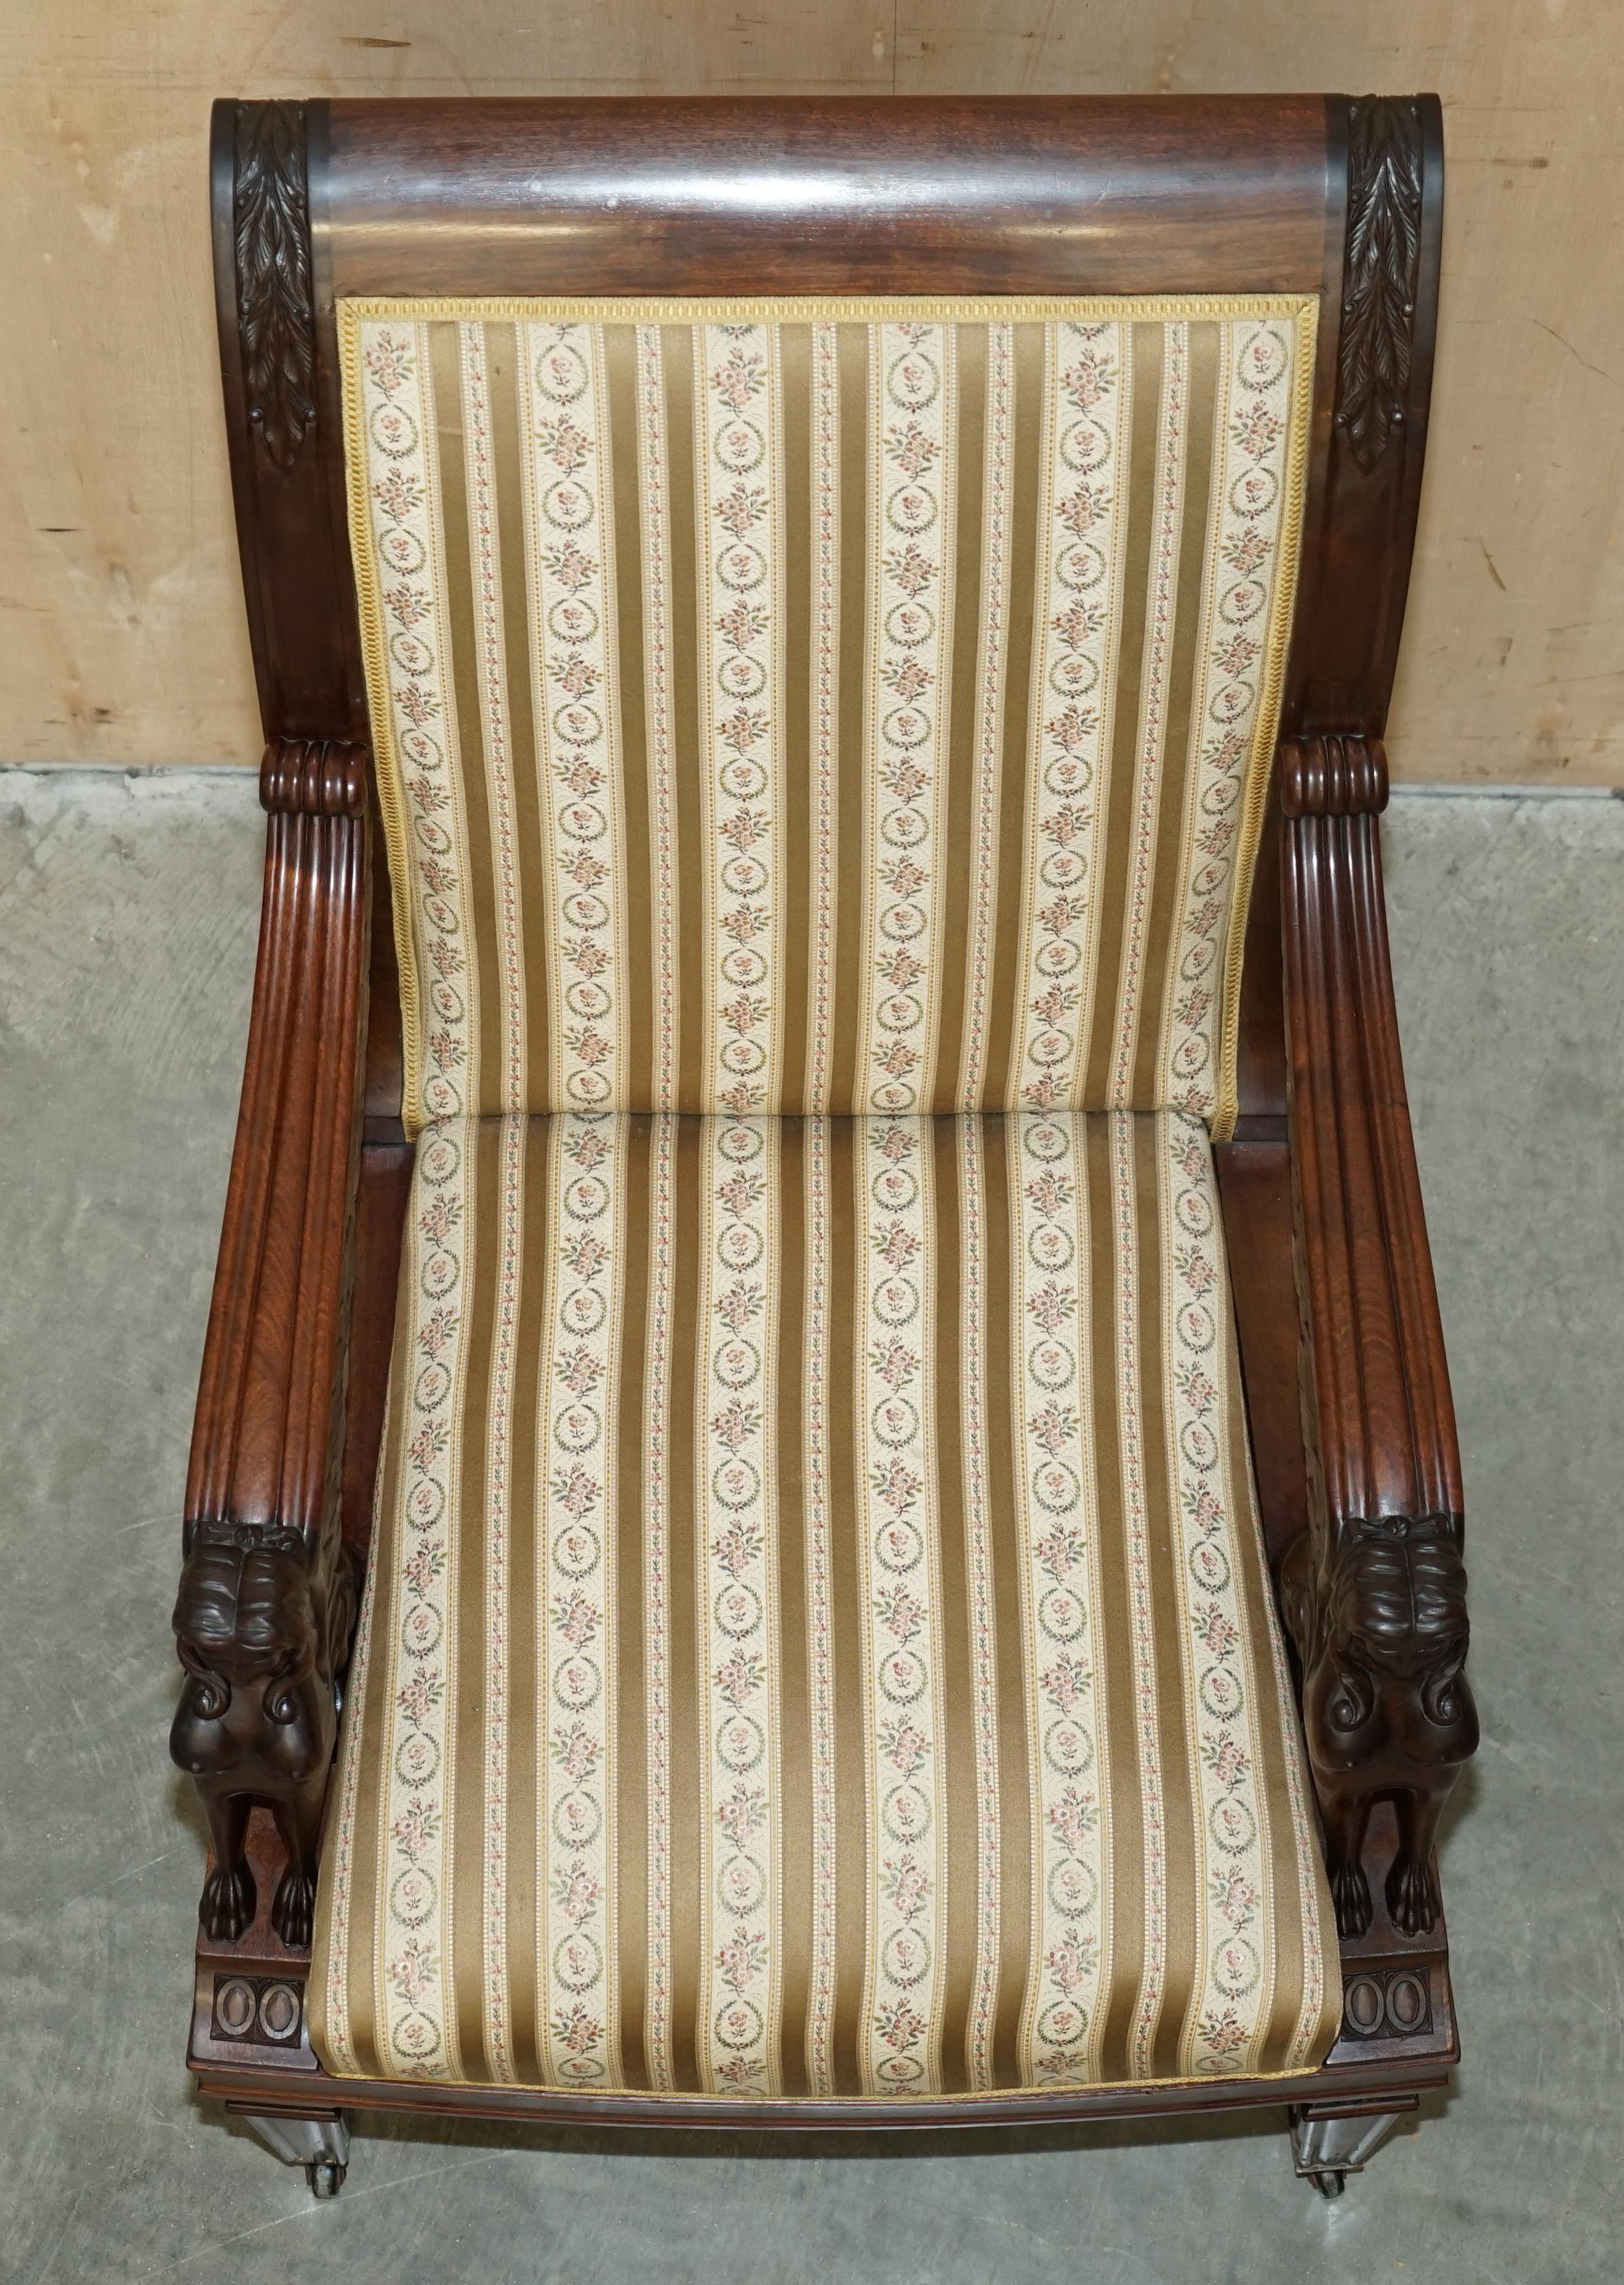 SIX FRENCH HARDWOOD HAND CARVED SPHINX ANTiQUE SALON DINING THRONE CHAIRS 1880 im Angebot 10